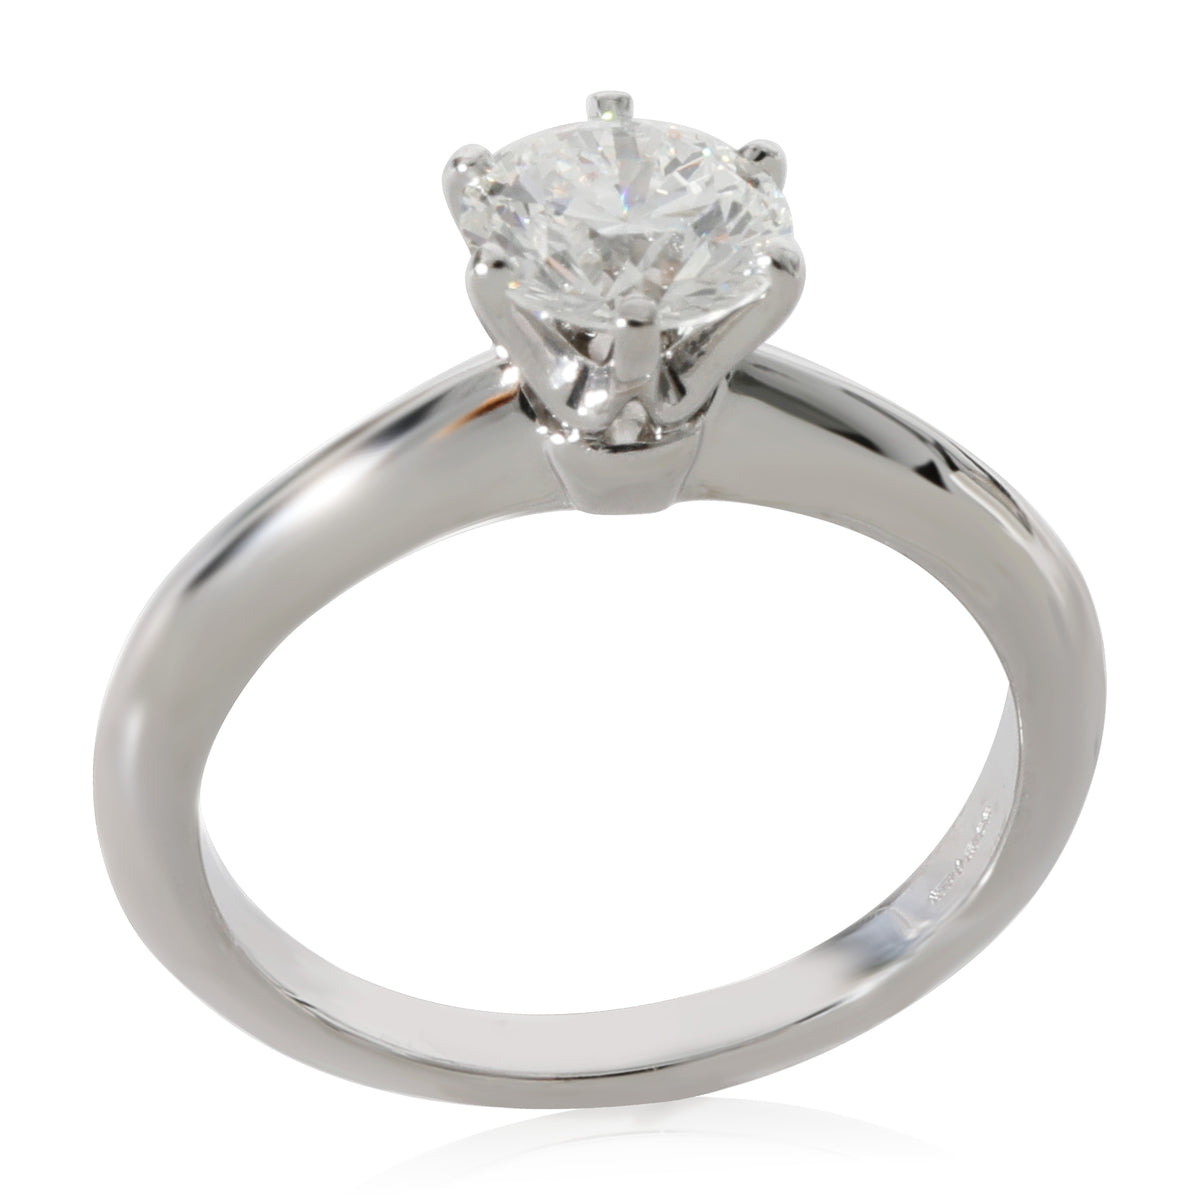 Tiffany & Co. Diamond Solitaire Engagement Ring in Platinum G VS1 0.94 CTW